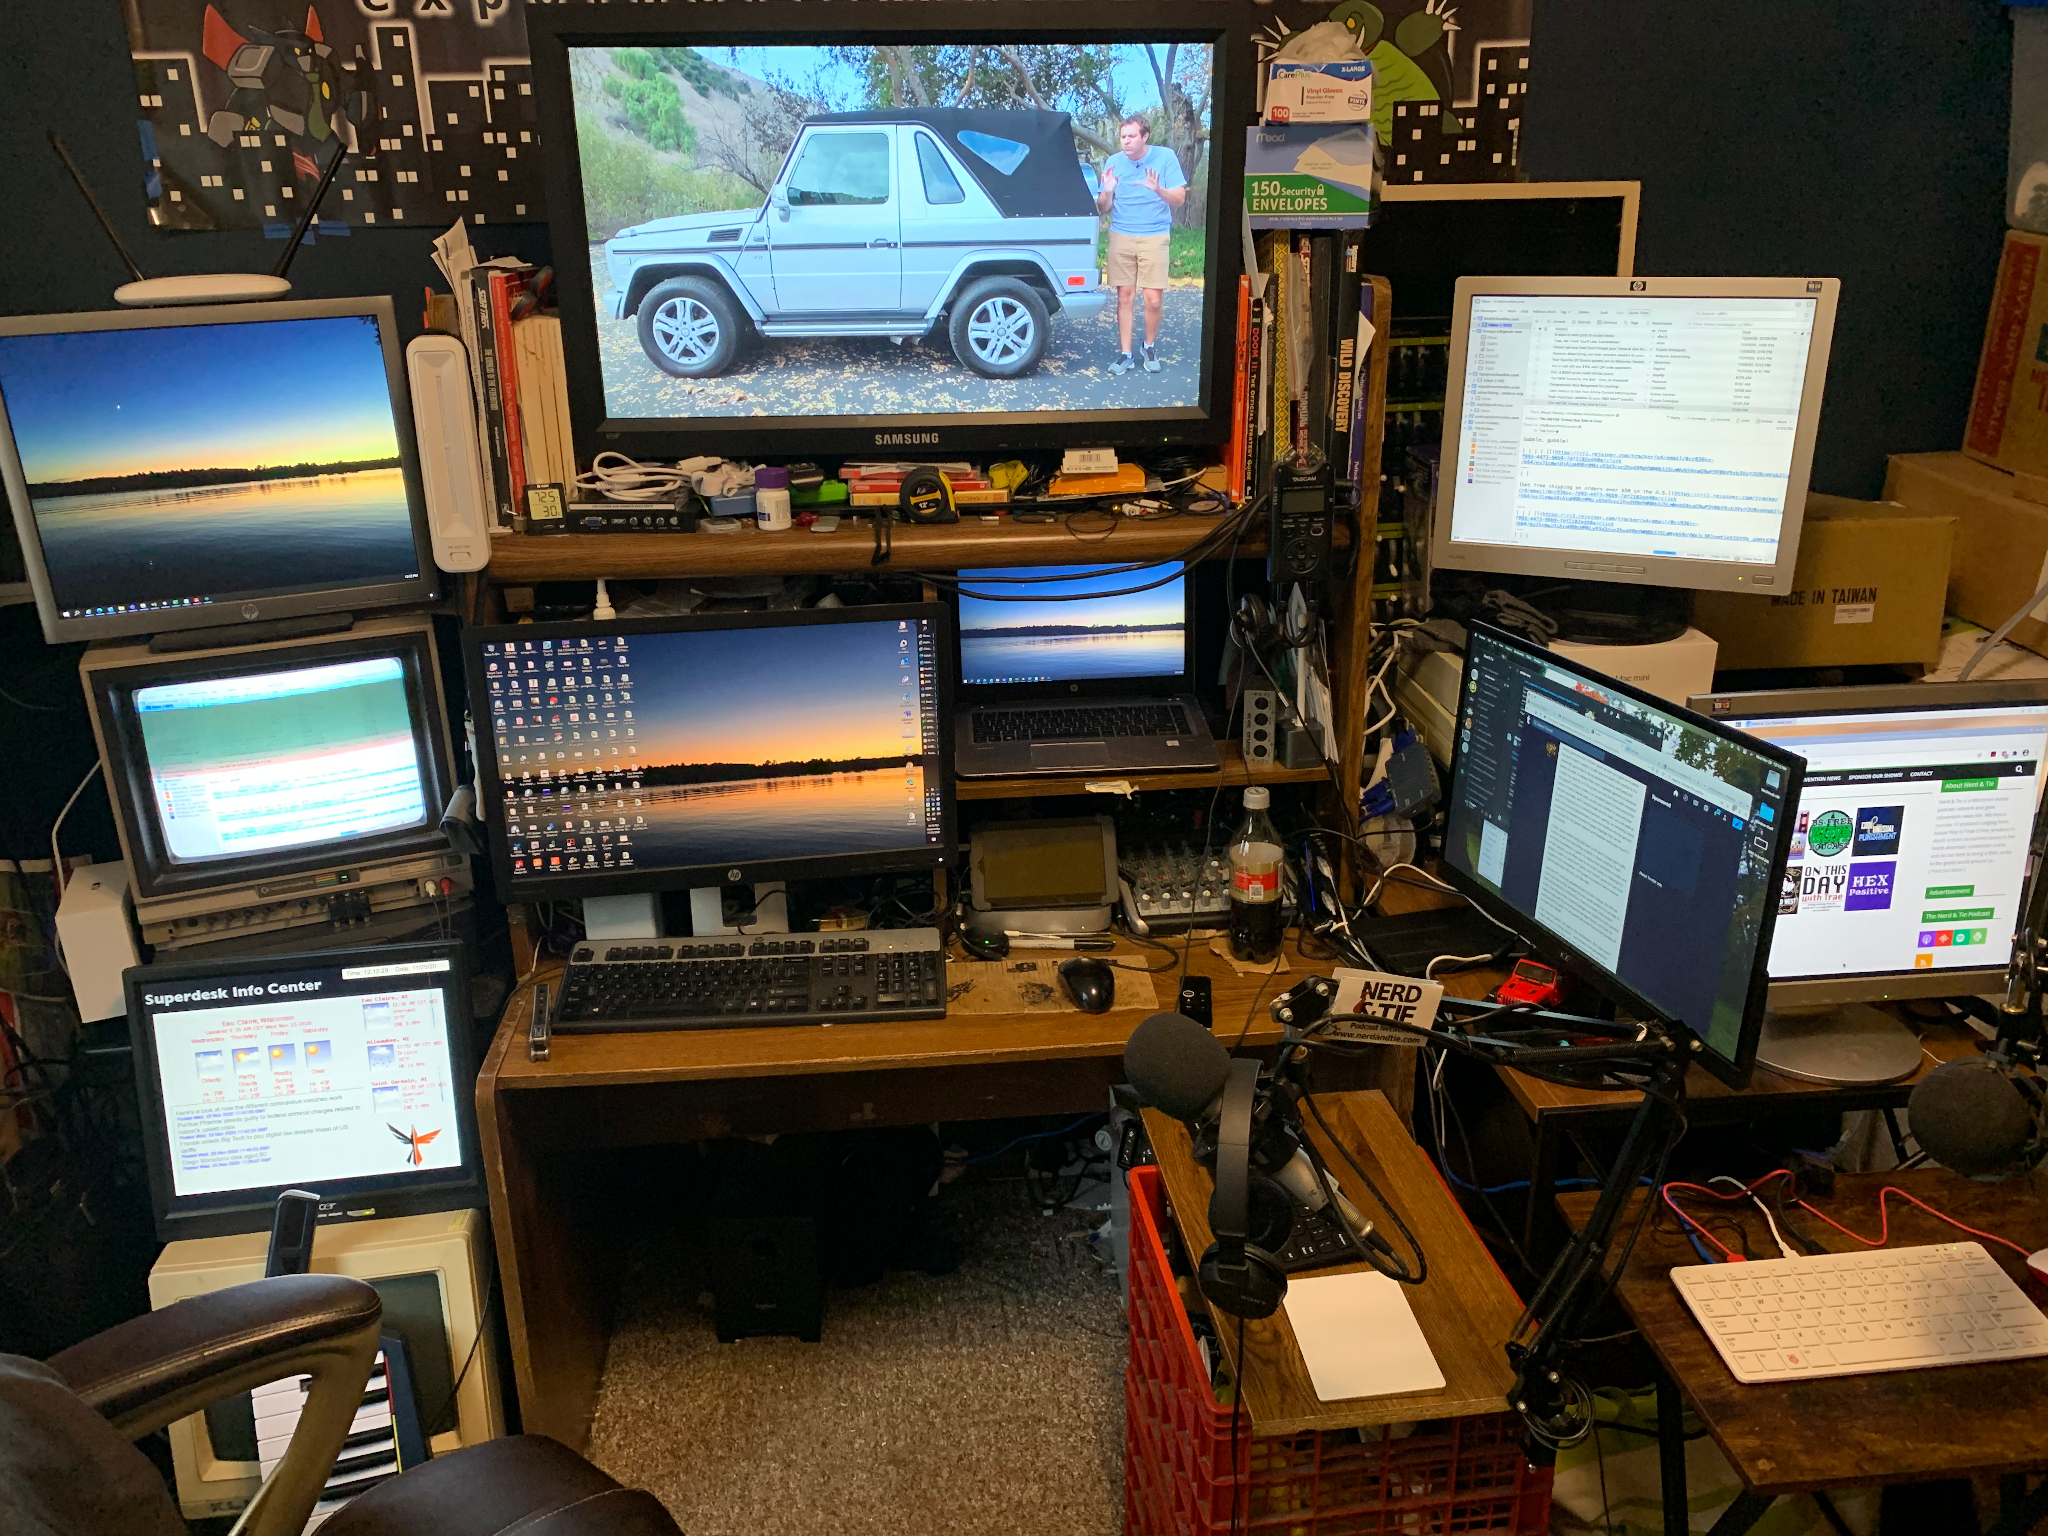 My current desk